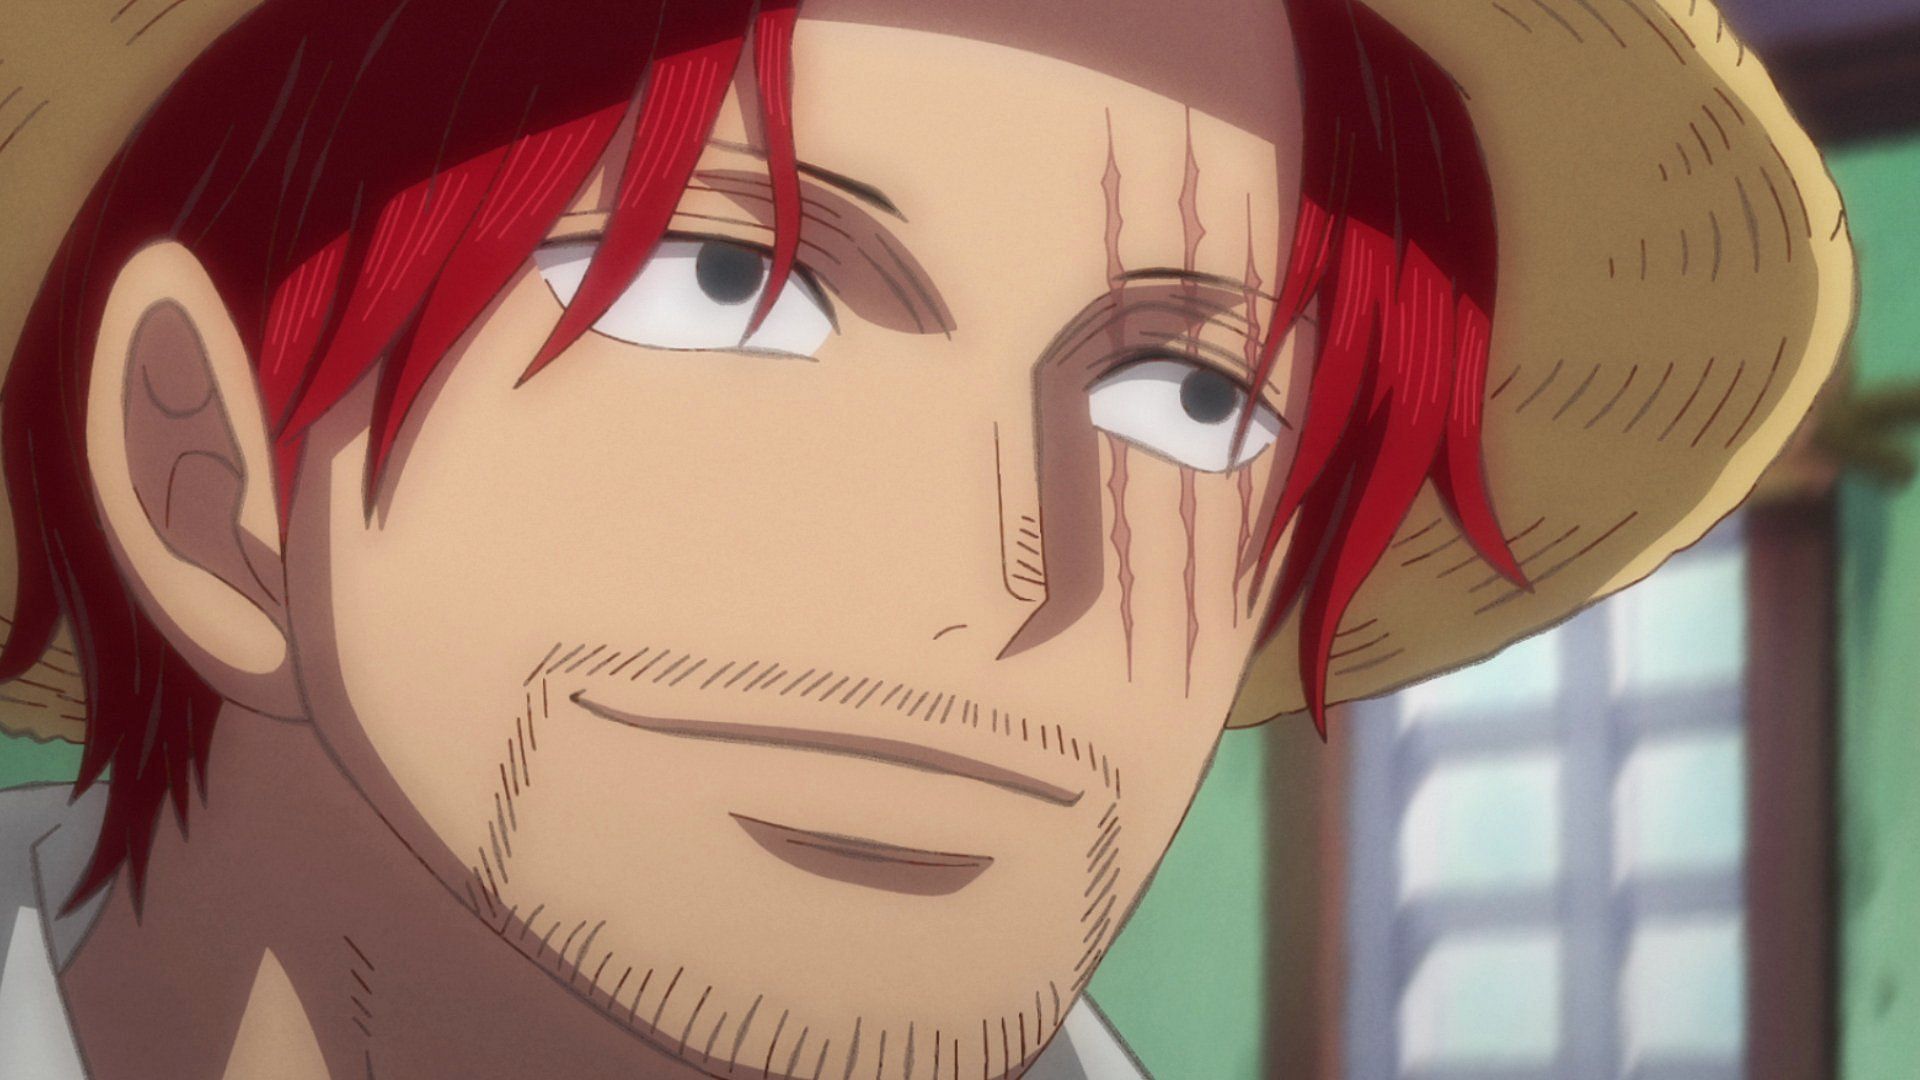 Next episode will be all about Shanks (Image via Toei Animation)